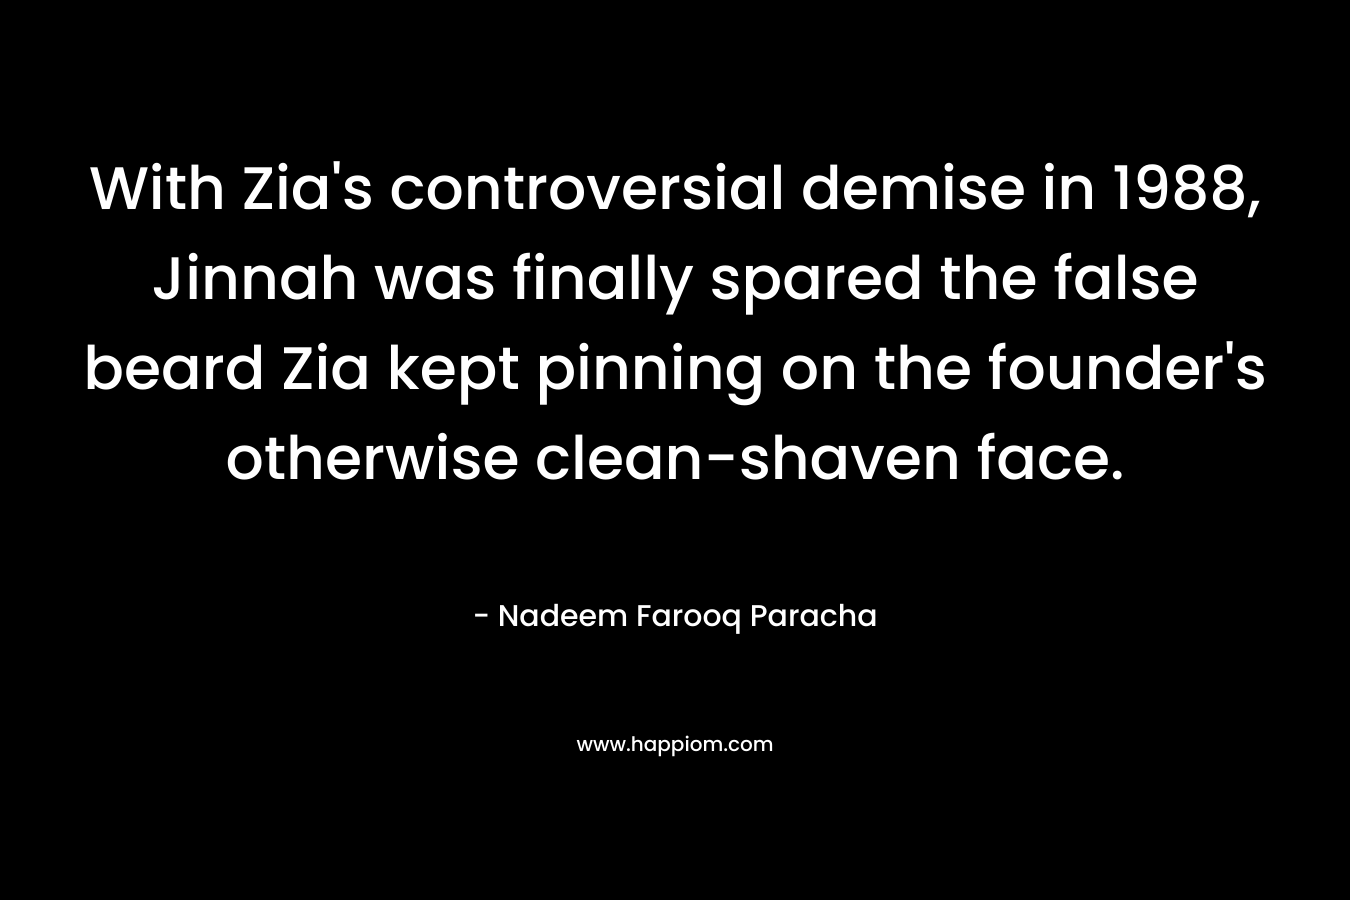 With Zia’s controversial demise in 1988, Jinnah was finally spared the false beard Zia kept pinning on the founder’s otherwise clean-shaven face. – Nadeem Farooq Paracha